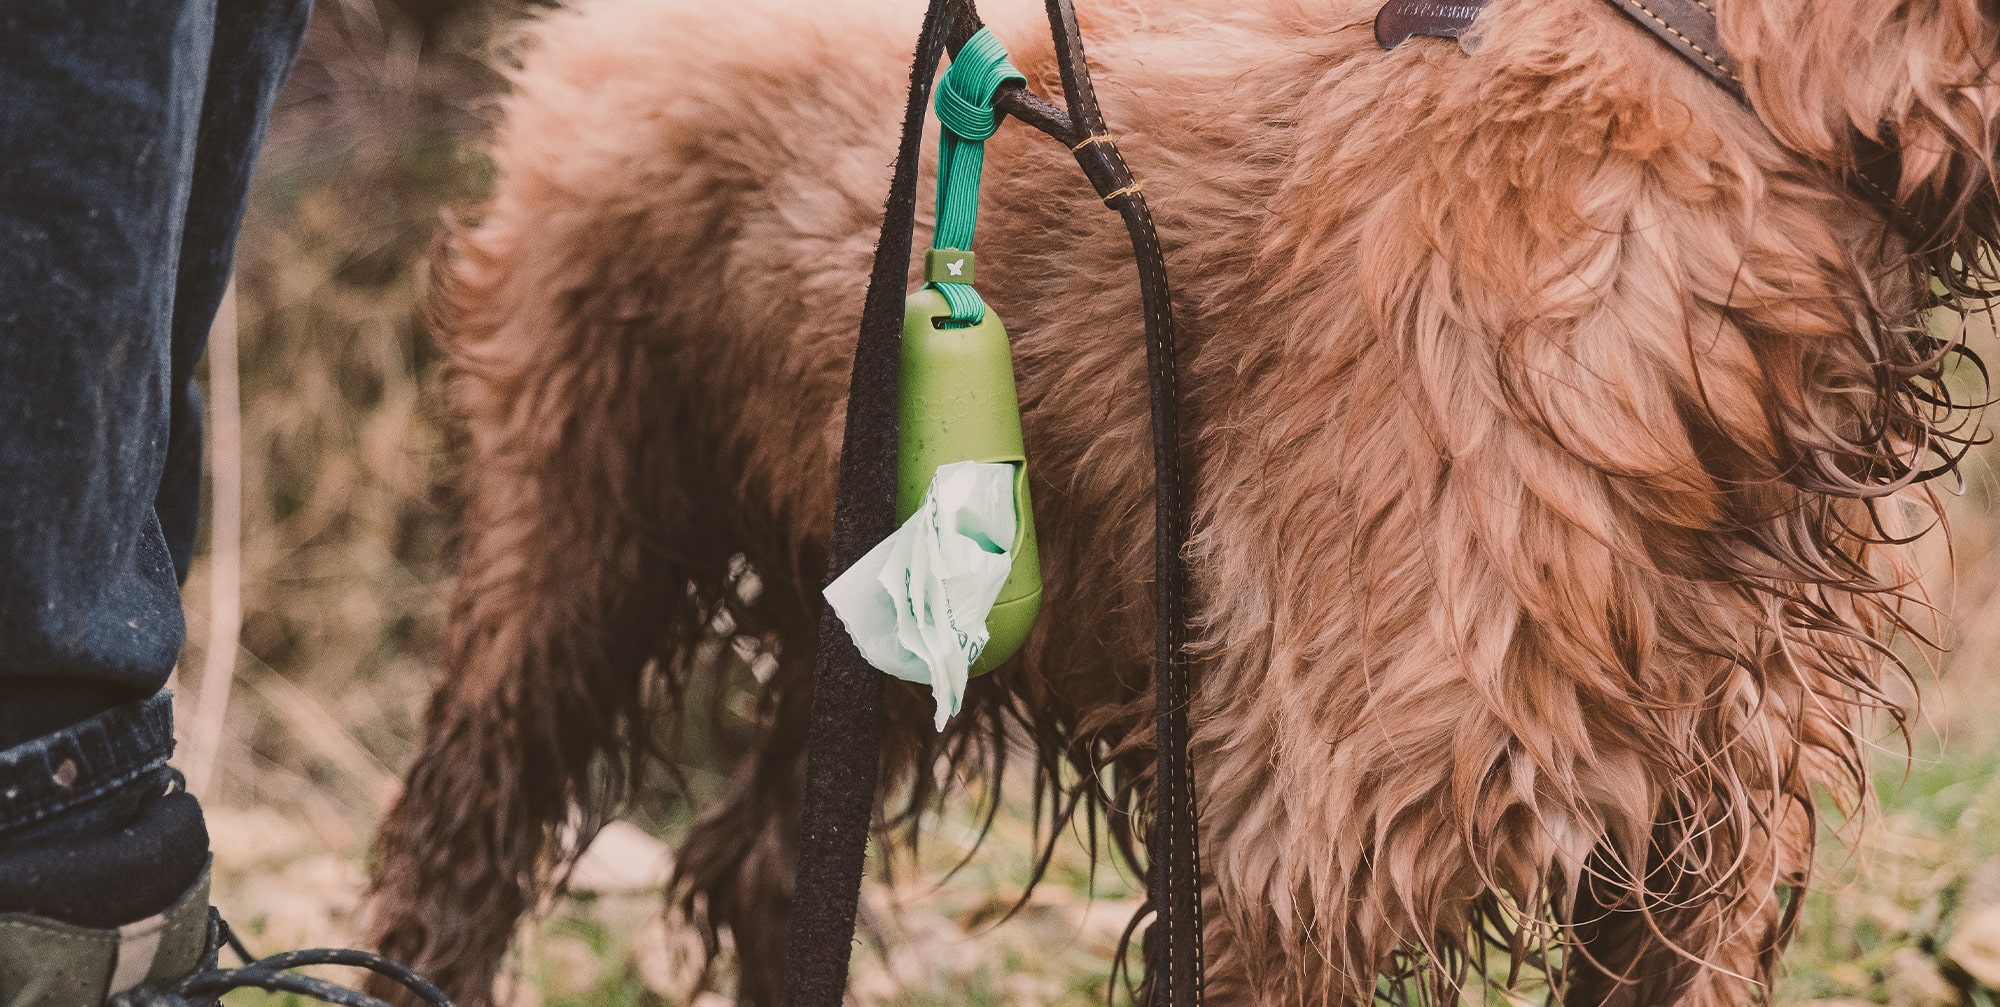 Unearthing Dog Poo Bags - What You Need To Know